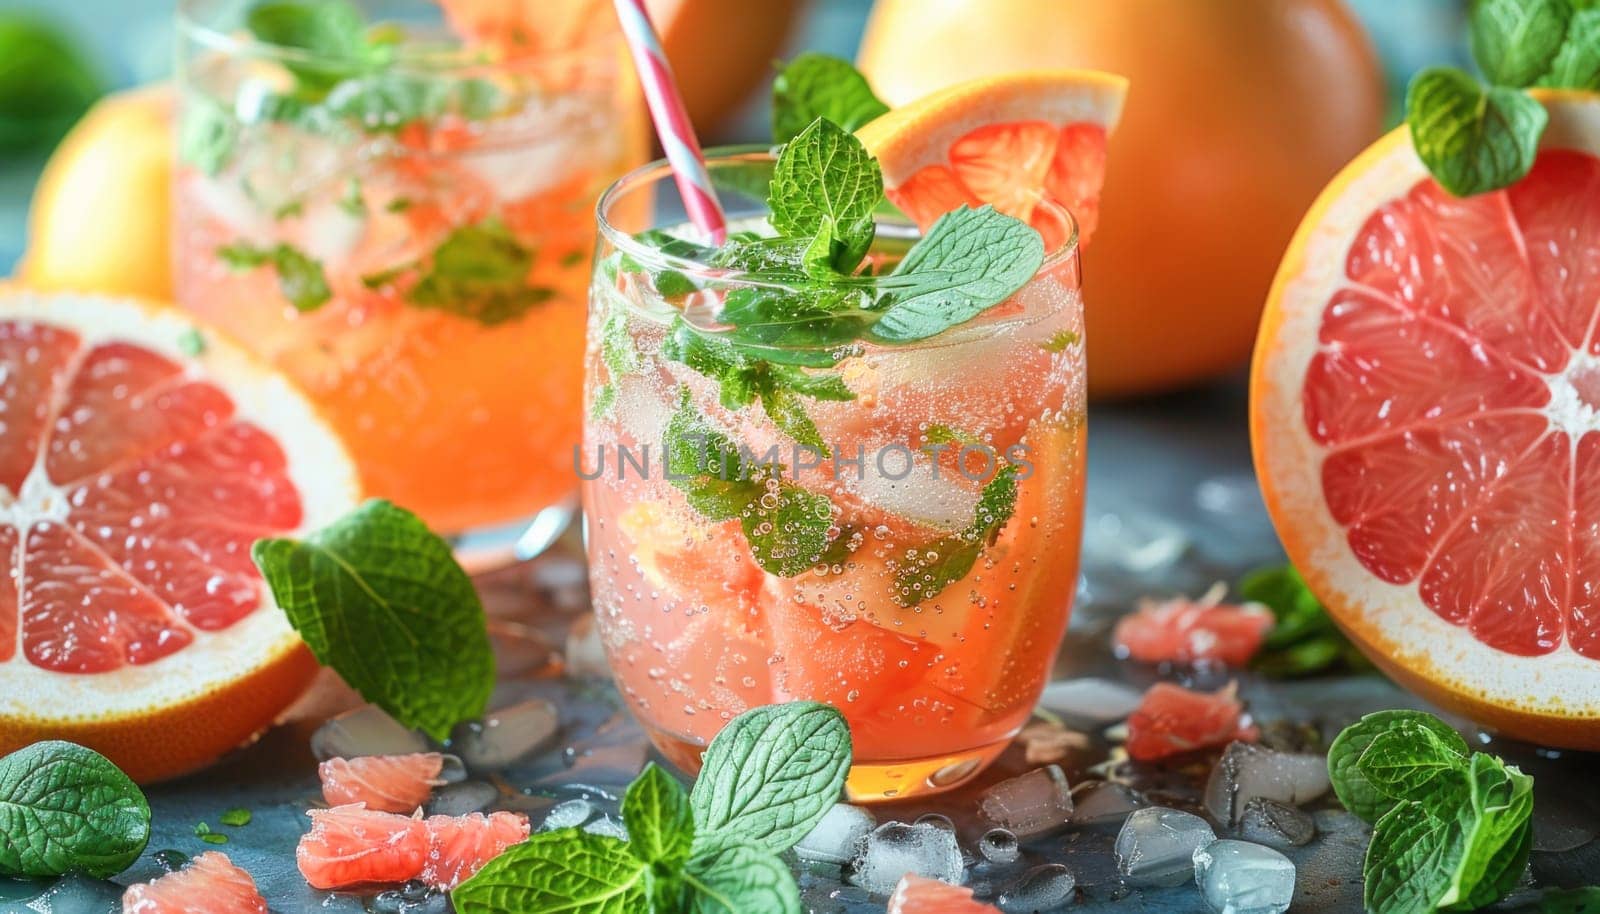 Close up of grapefruit drink with ice and mint leaves, a refreshing and healthy beverage option on a table